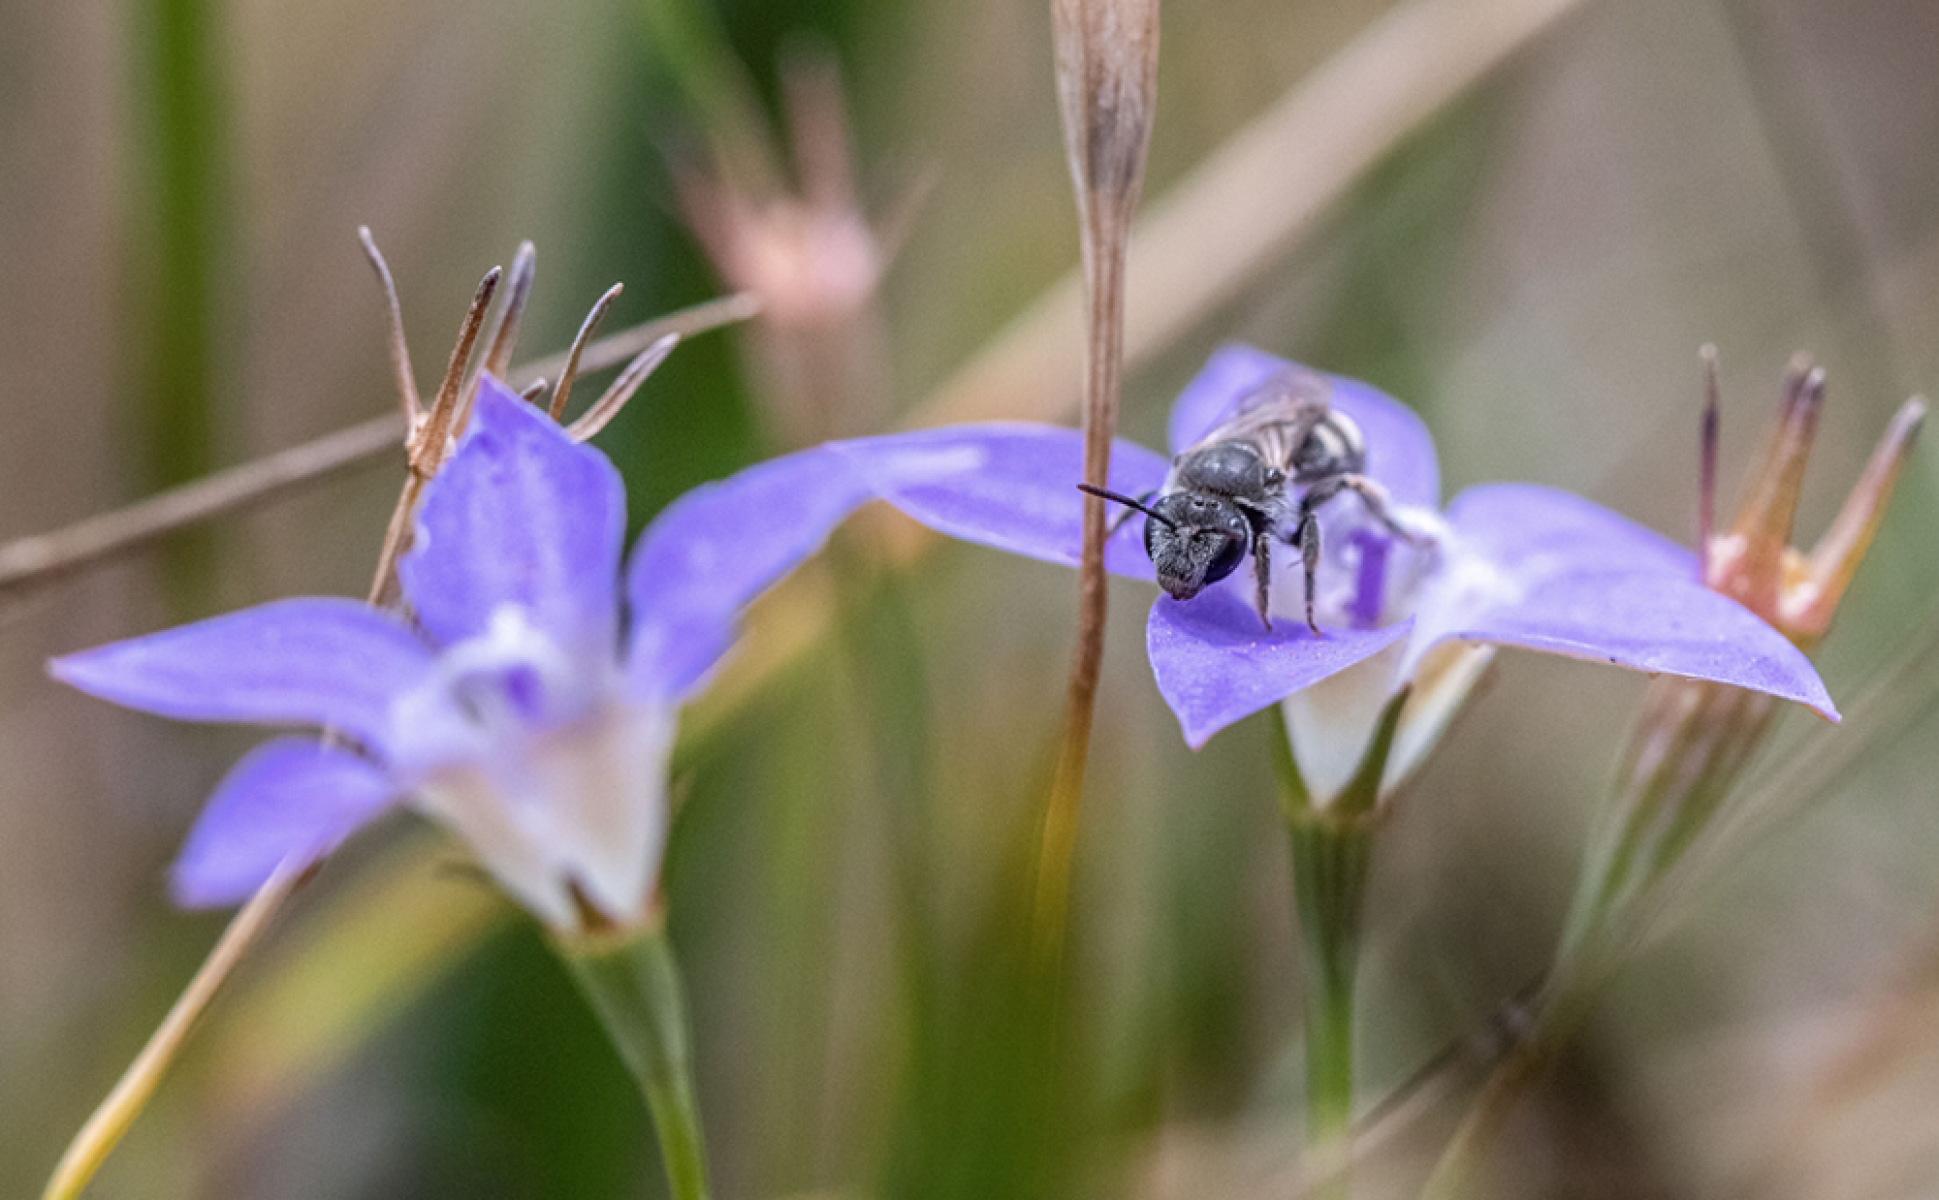 Wahlenbergia (Native Bee) sitting on a purple flower